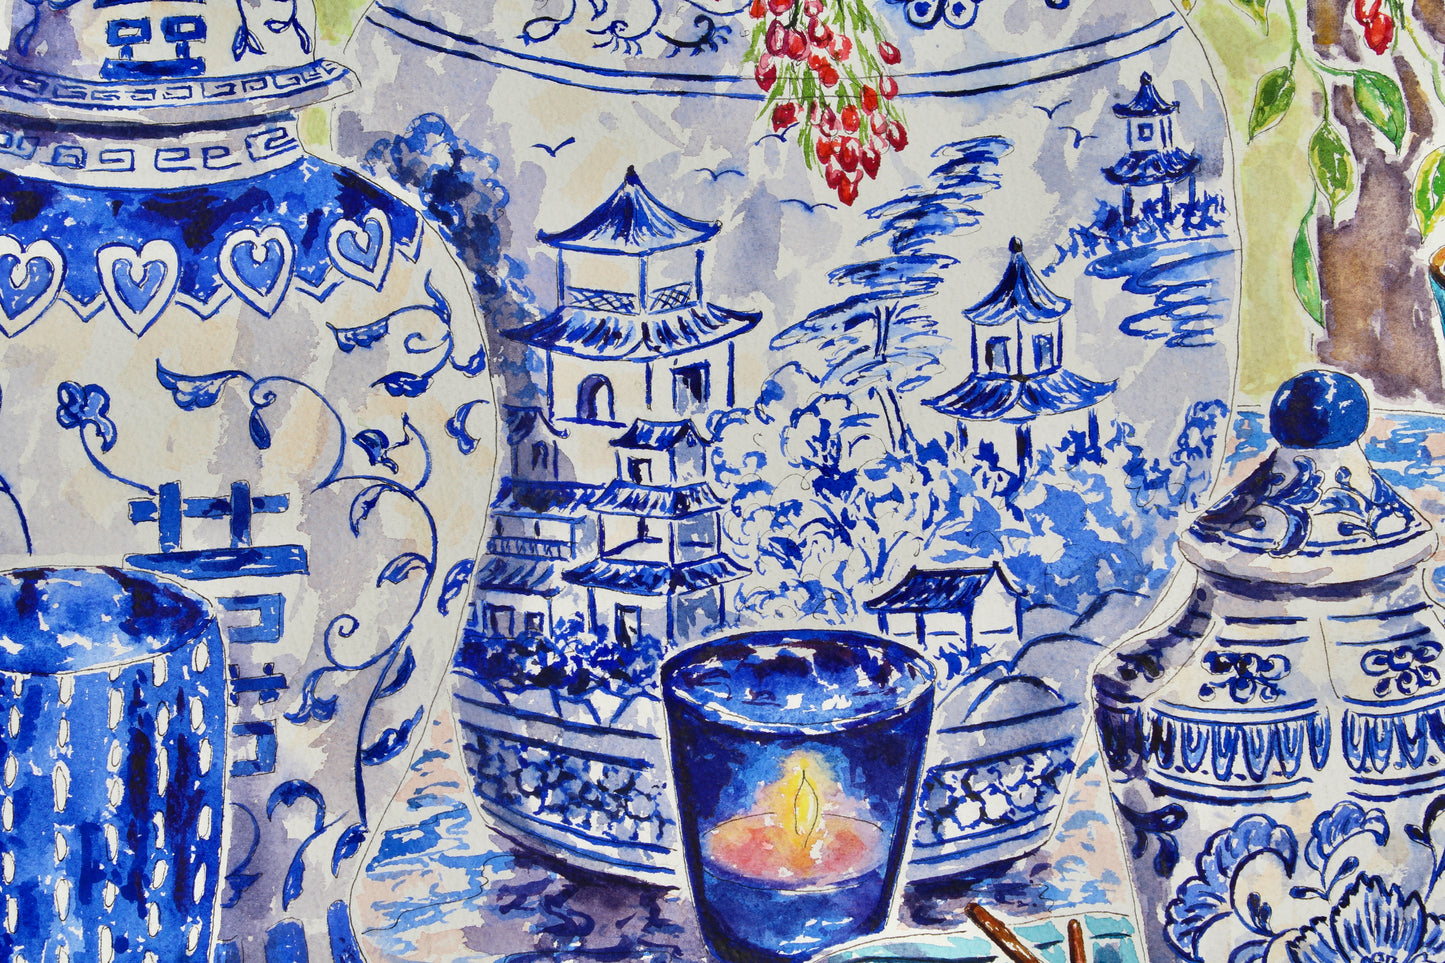 Where Colors Conspire, A Masterpiece To Impart, An Original 25.5" Square Watercolor And Ink Chinoiserie Painting